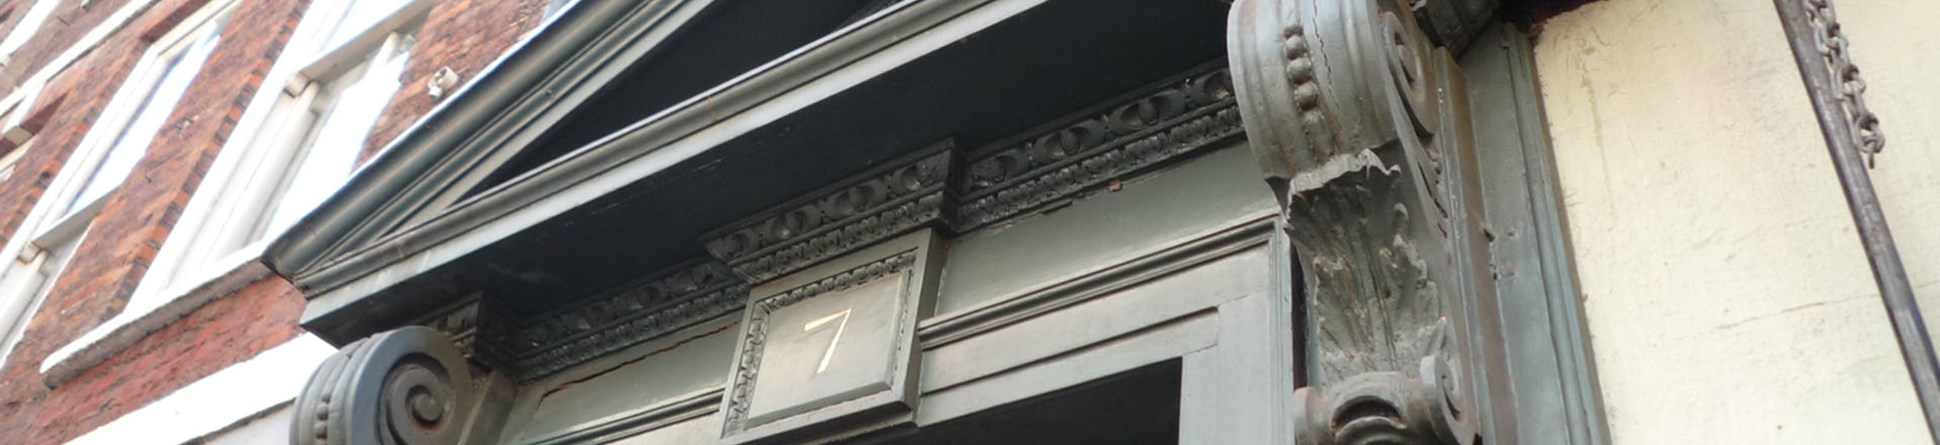 The exterior of number 7 Denmark Street in London